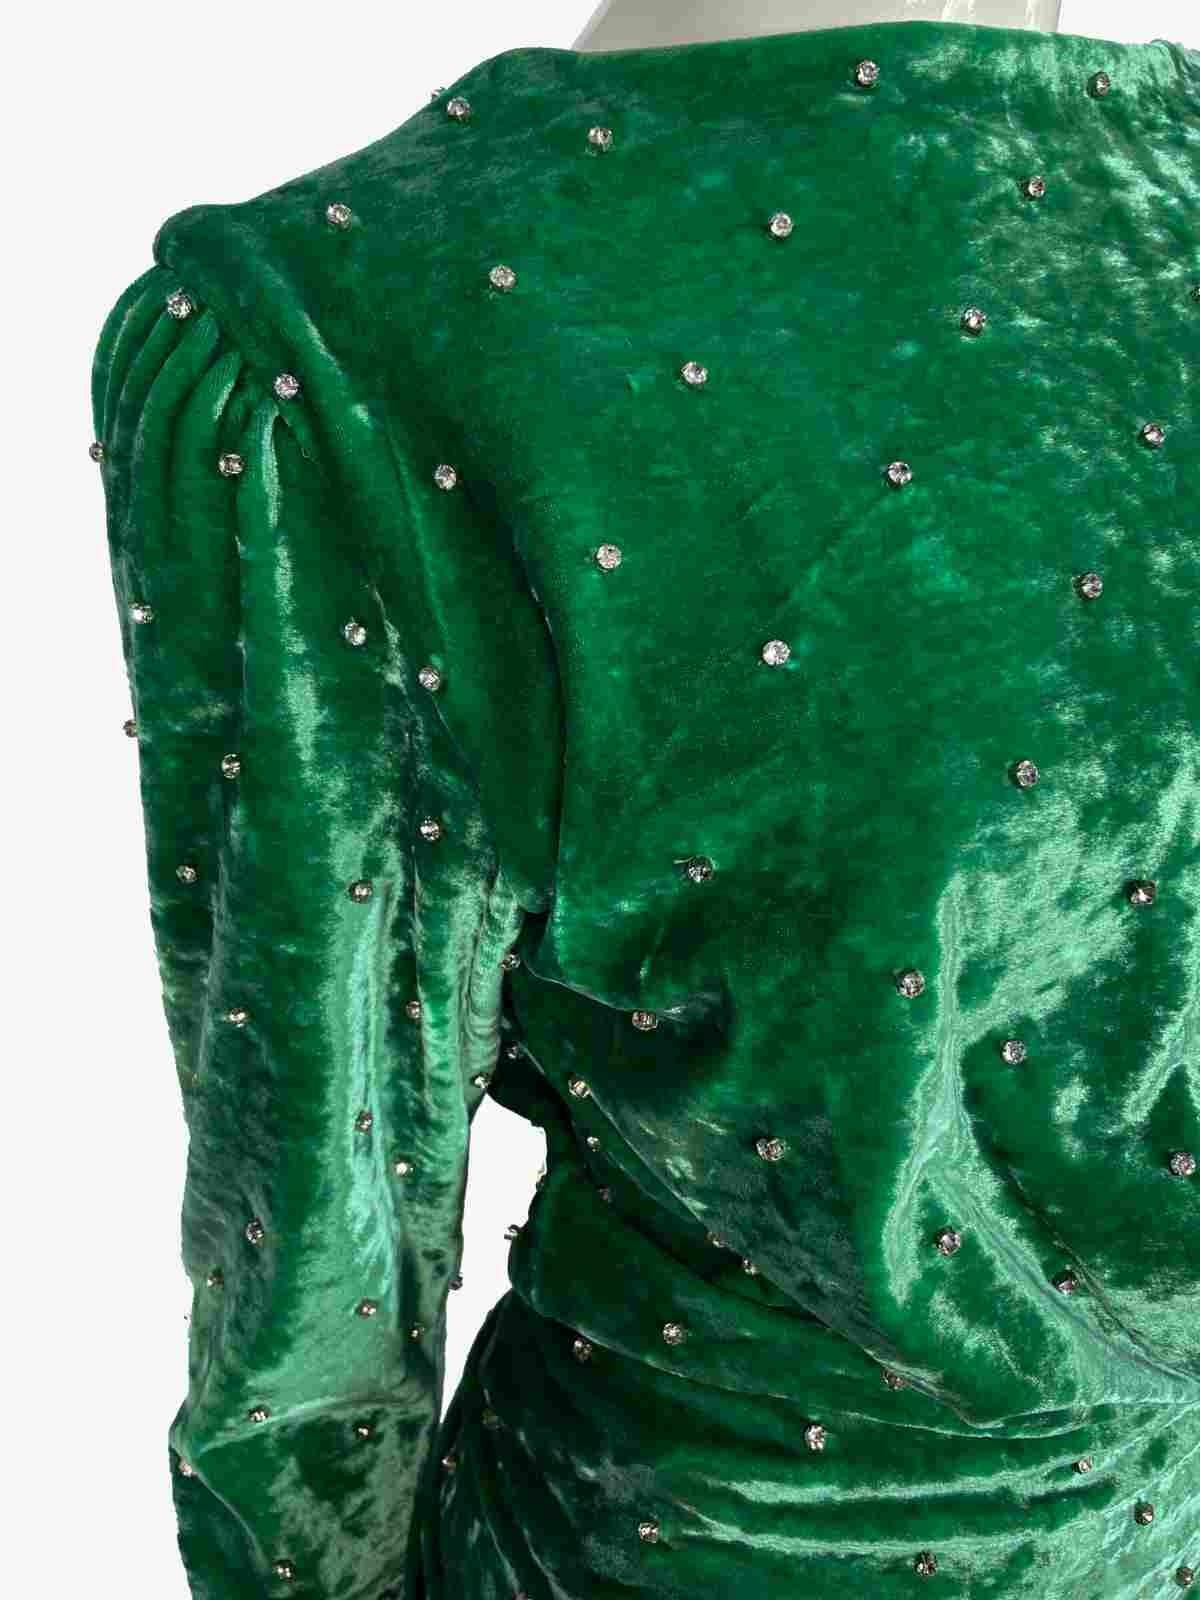 Attico Rhinestone Green Velvet Dress, 2020 In Excellent Condition For Sale In New York, NY